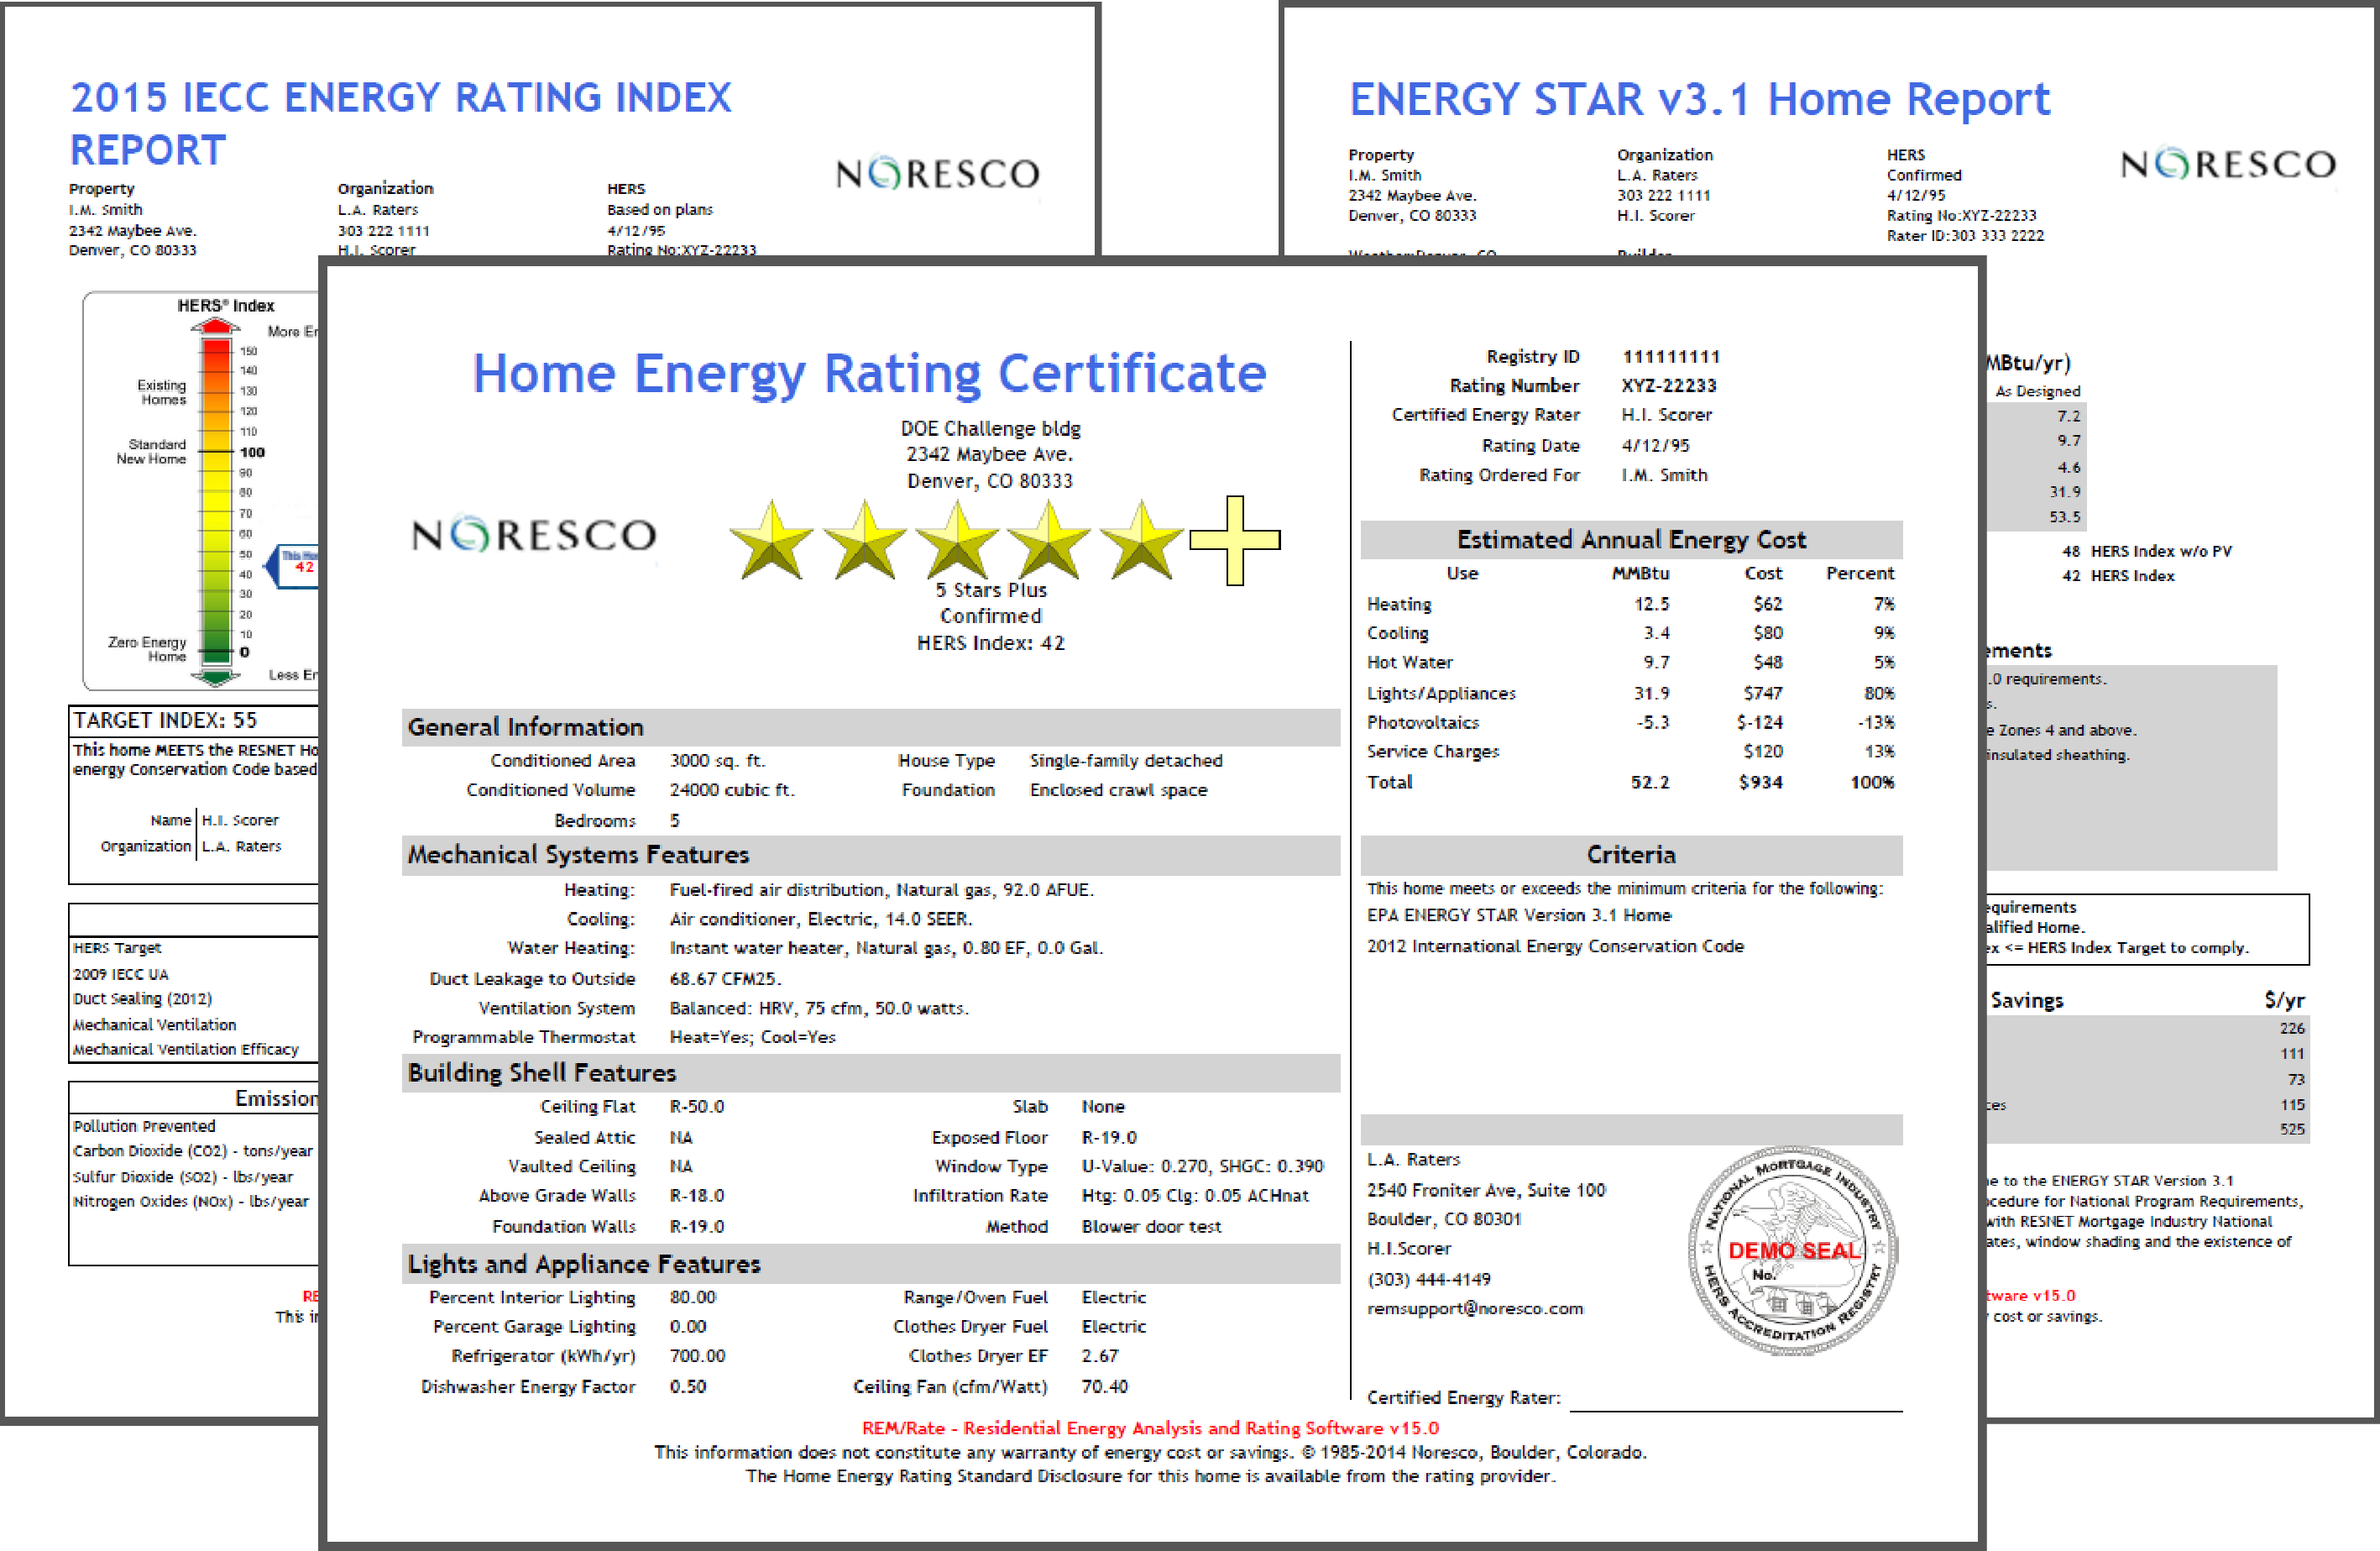 DOE, ENERGY STAR<sup>®</sup> and HERS Reports